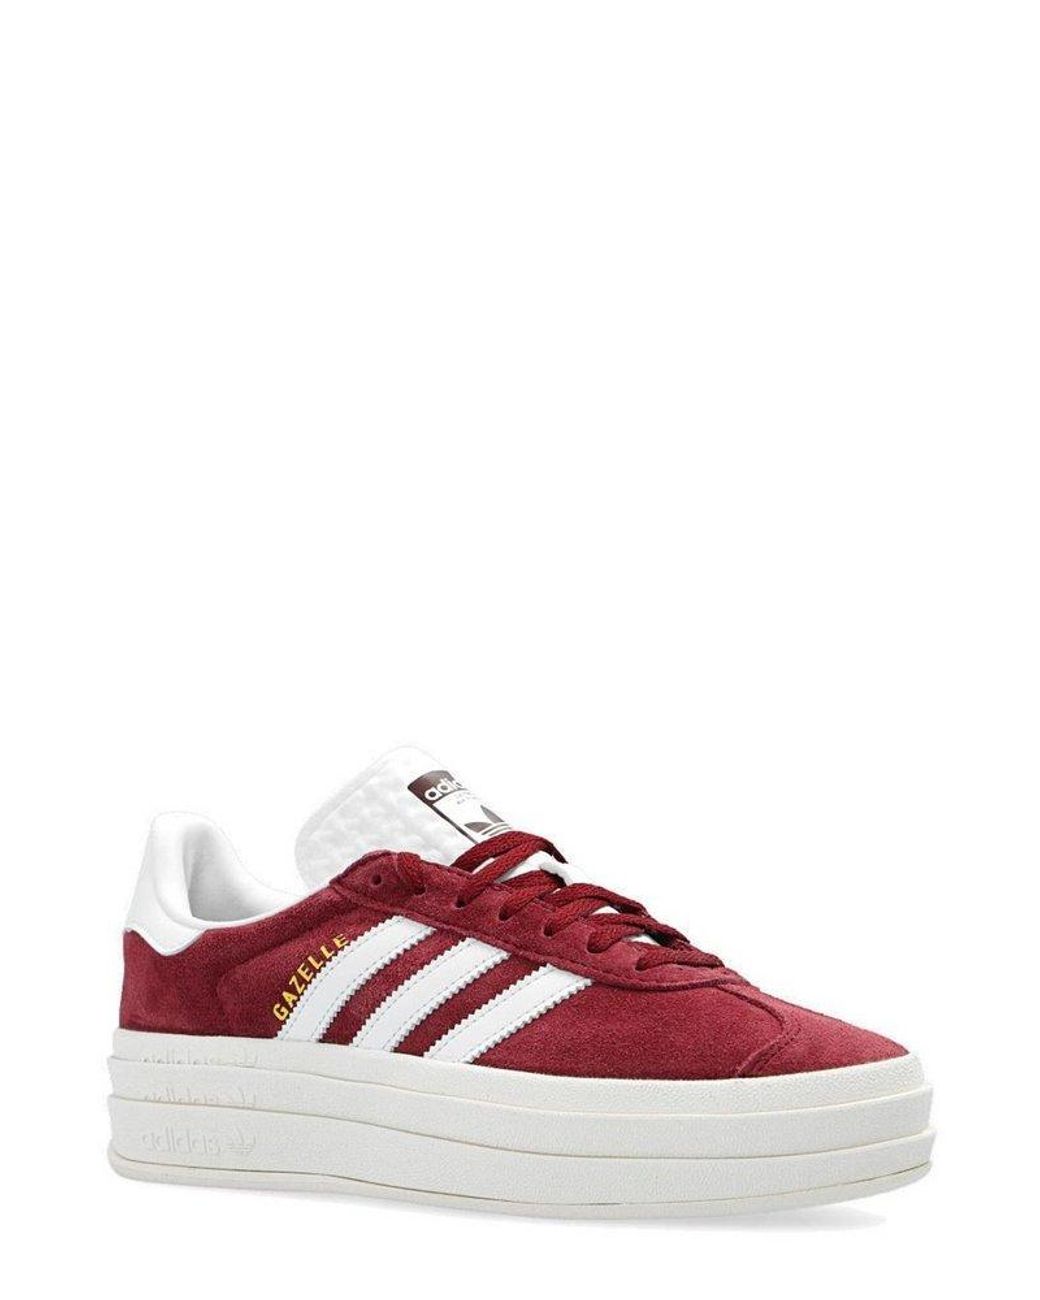 adidas Originals Gazelle Bold Sneakers in Red | Lyst